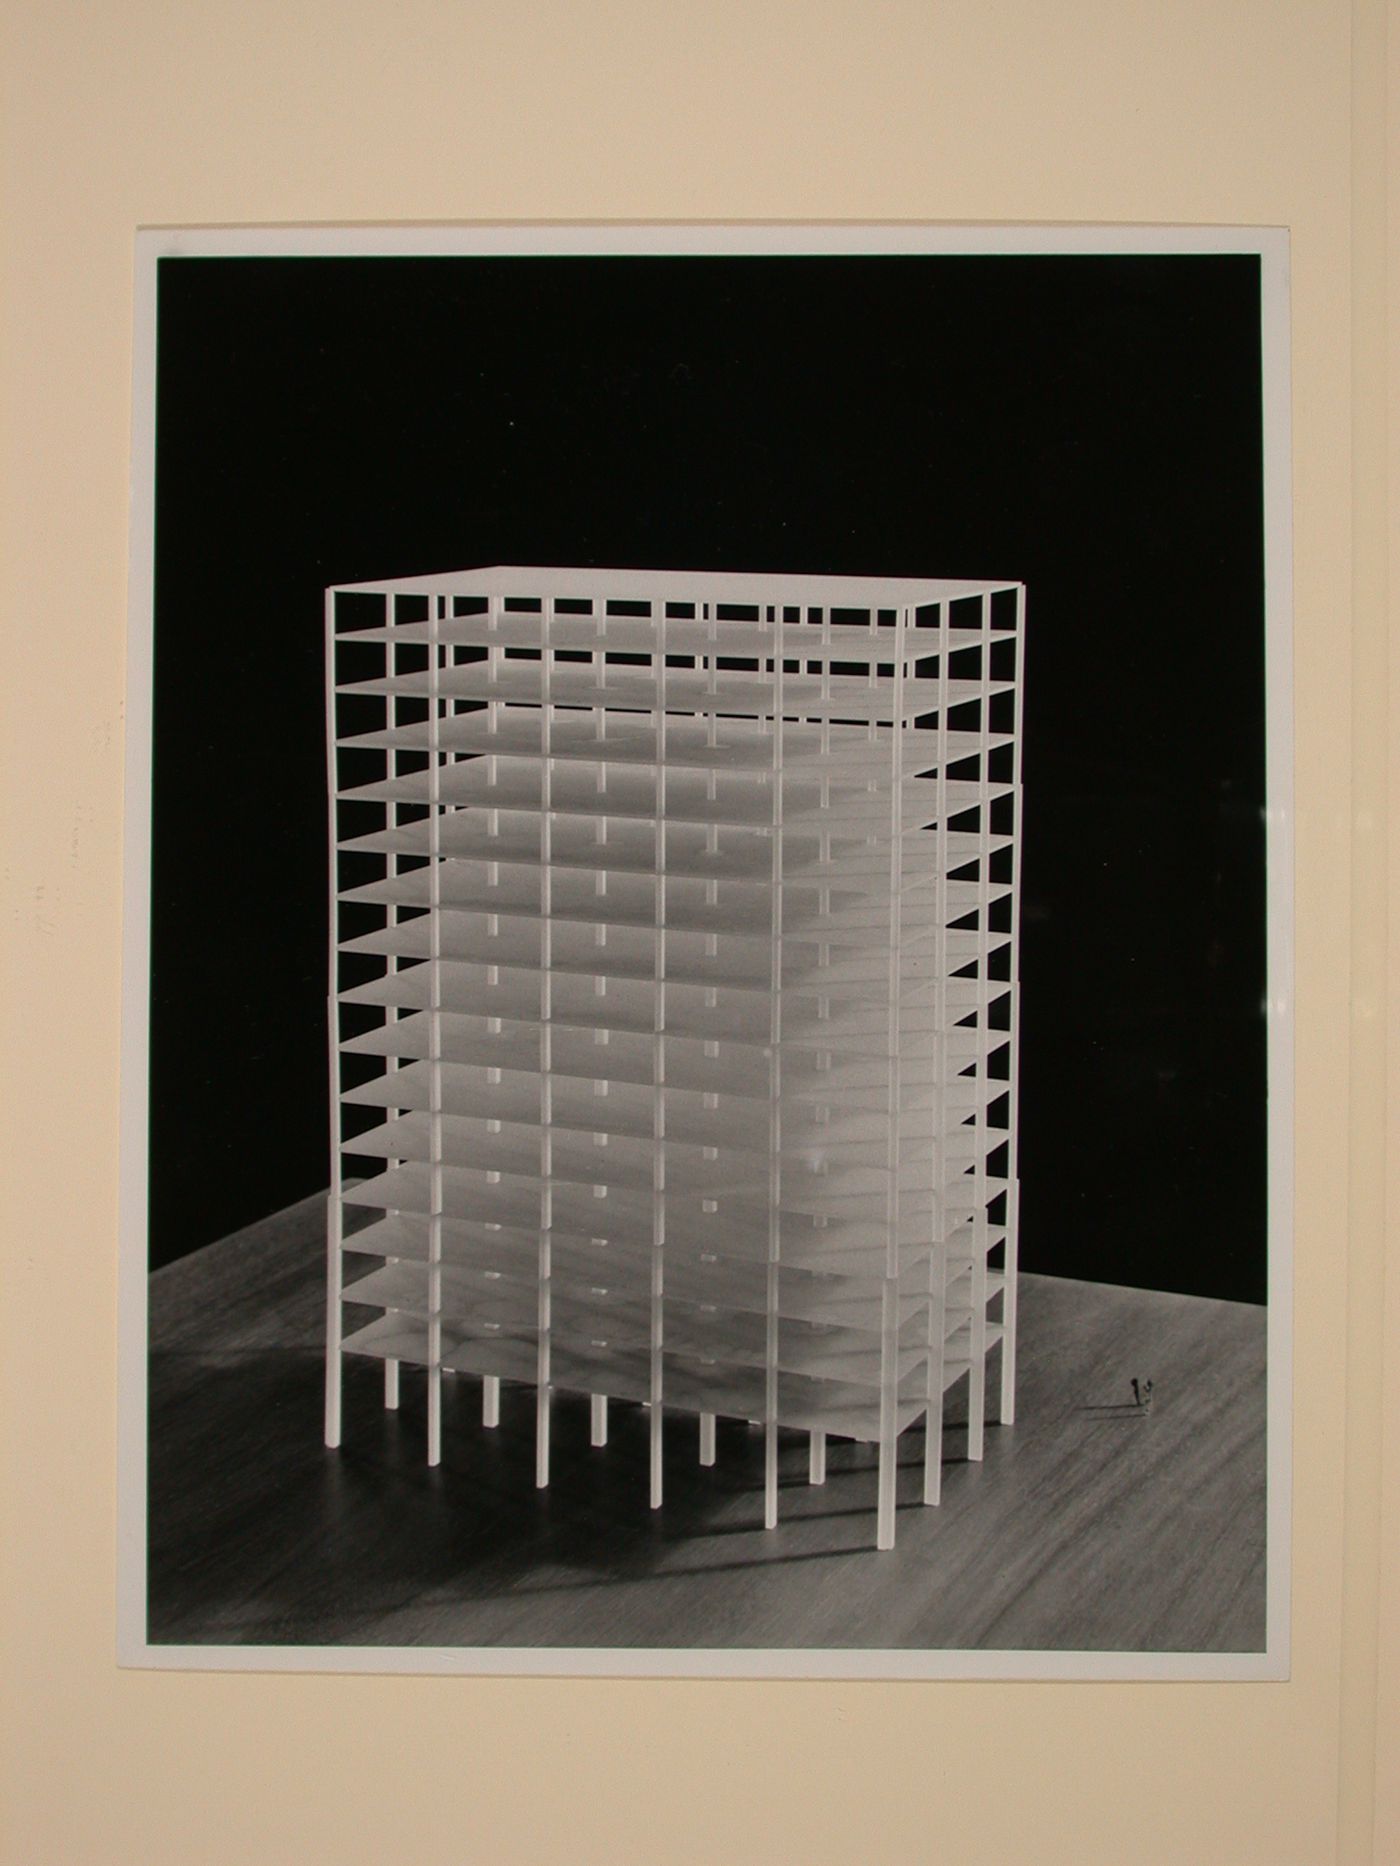 Photograph of a student [?] model for a building with concrete structural framework, Sequence of Tall Buildings